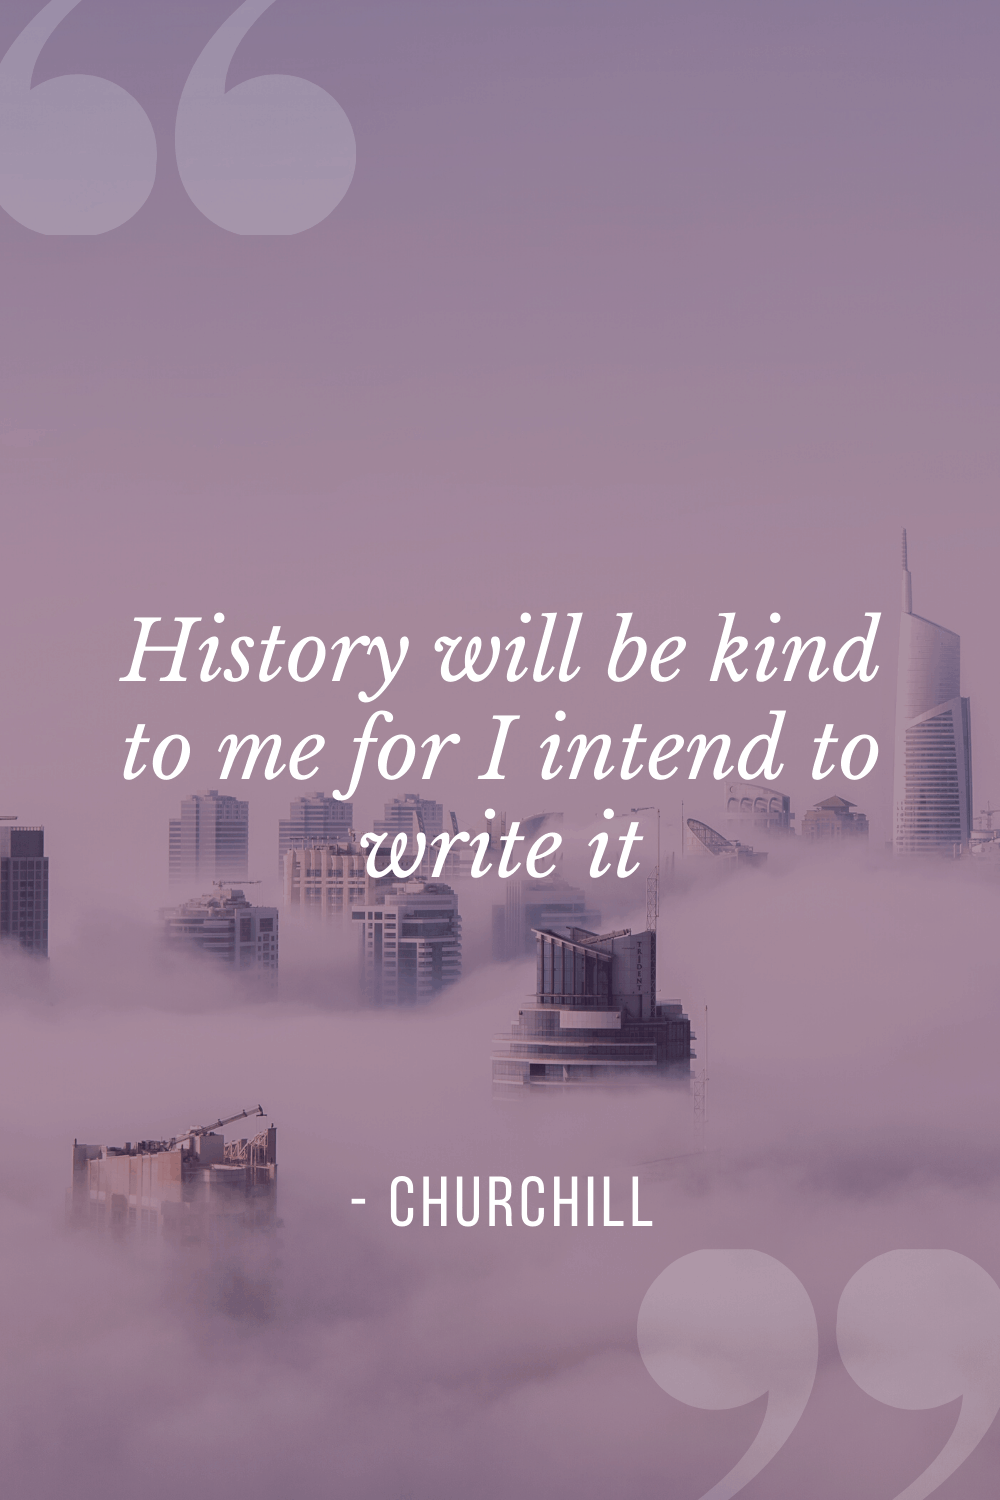 “History will be kind to me for I intend to write it”, Winston Churchill